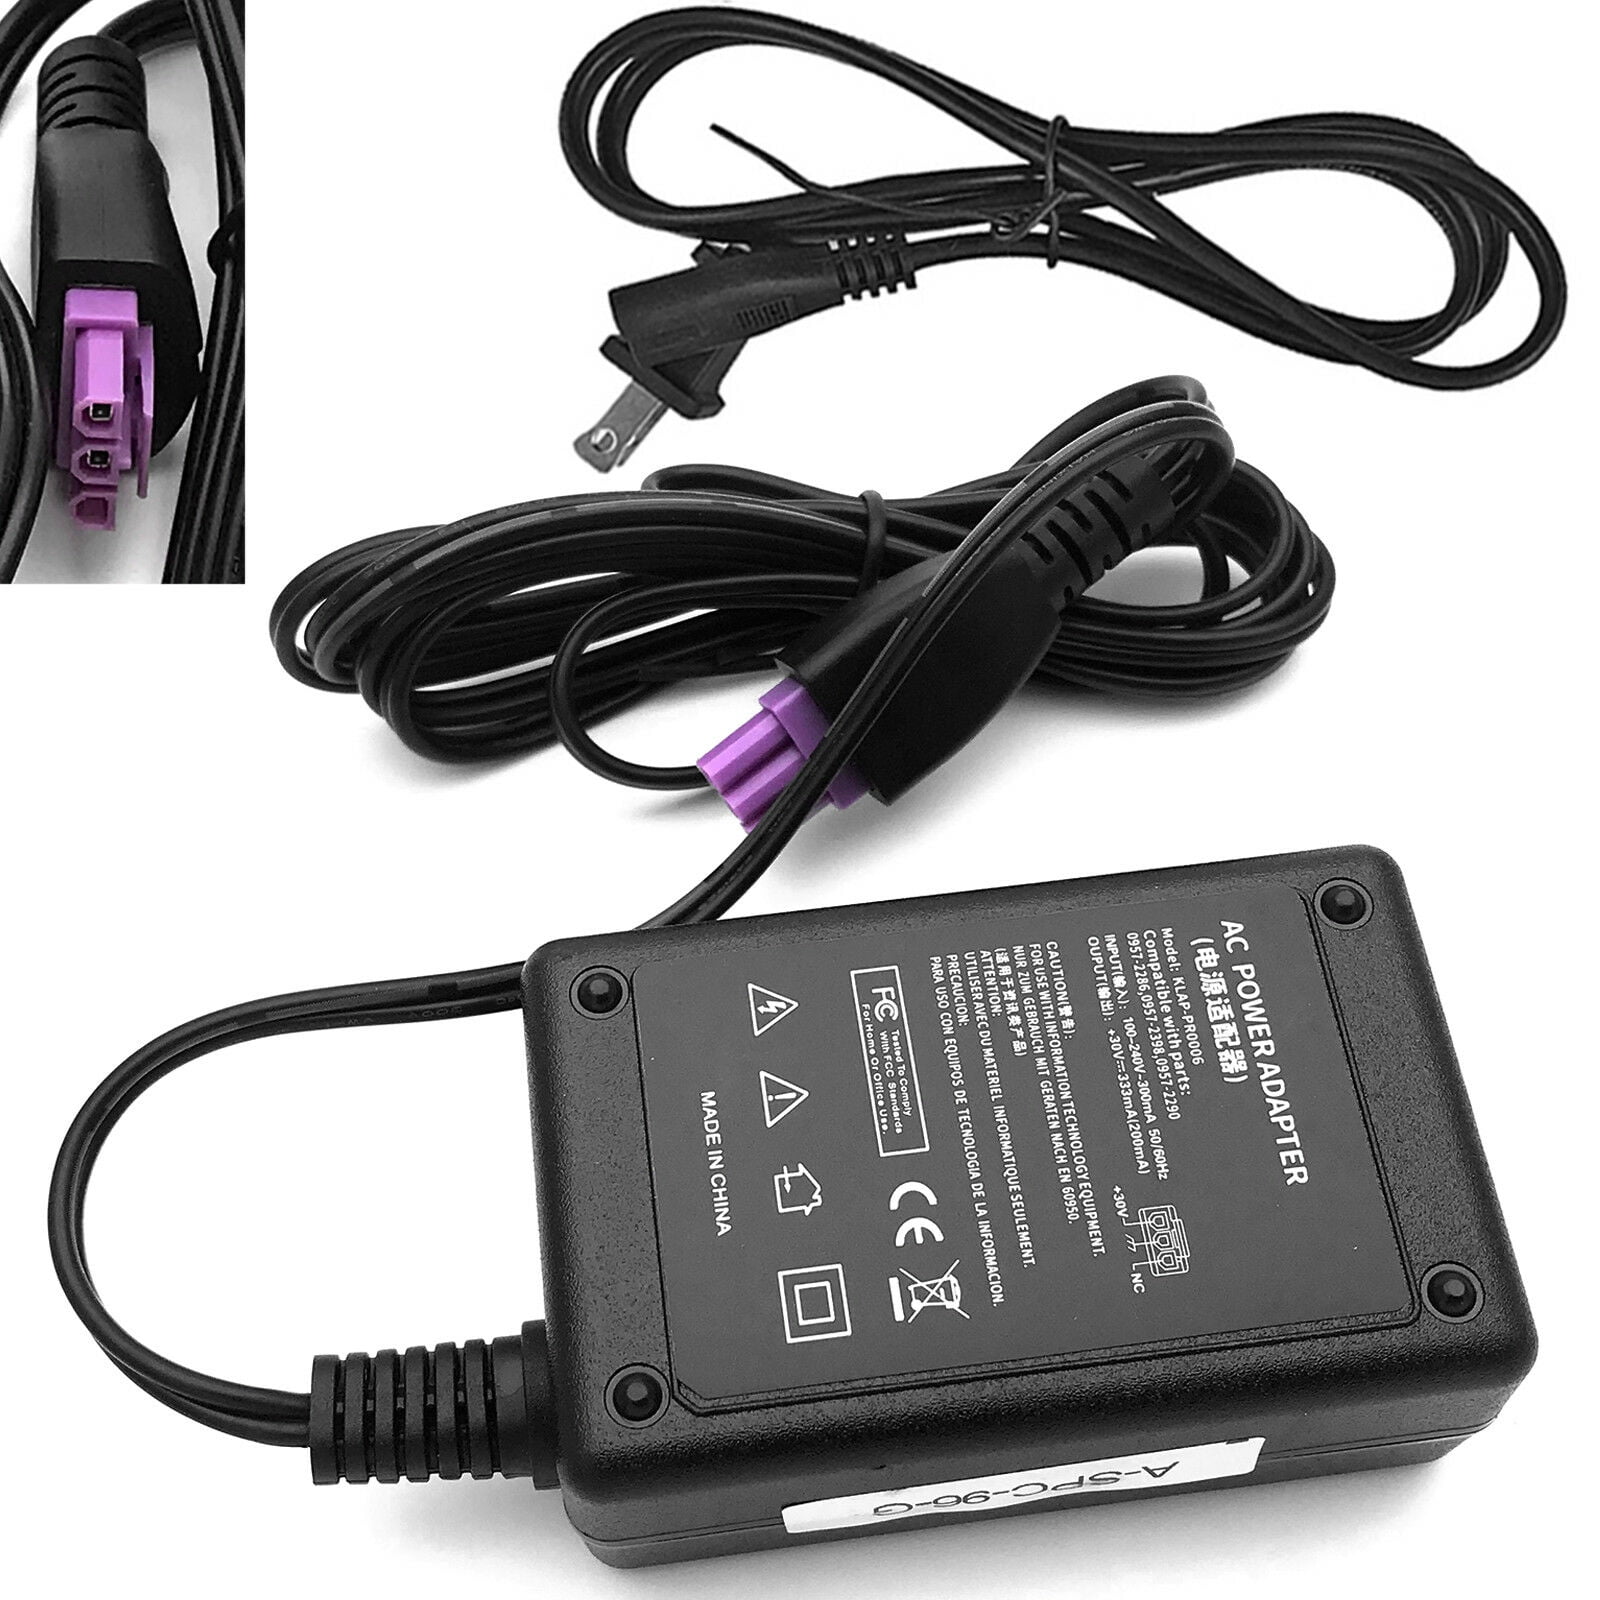 Mains 0957-2146 32V 940mA and 16V 625mA AC Adapter Power Cord for HP Printer 